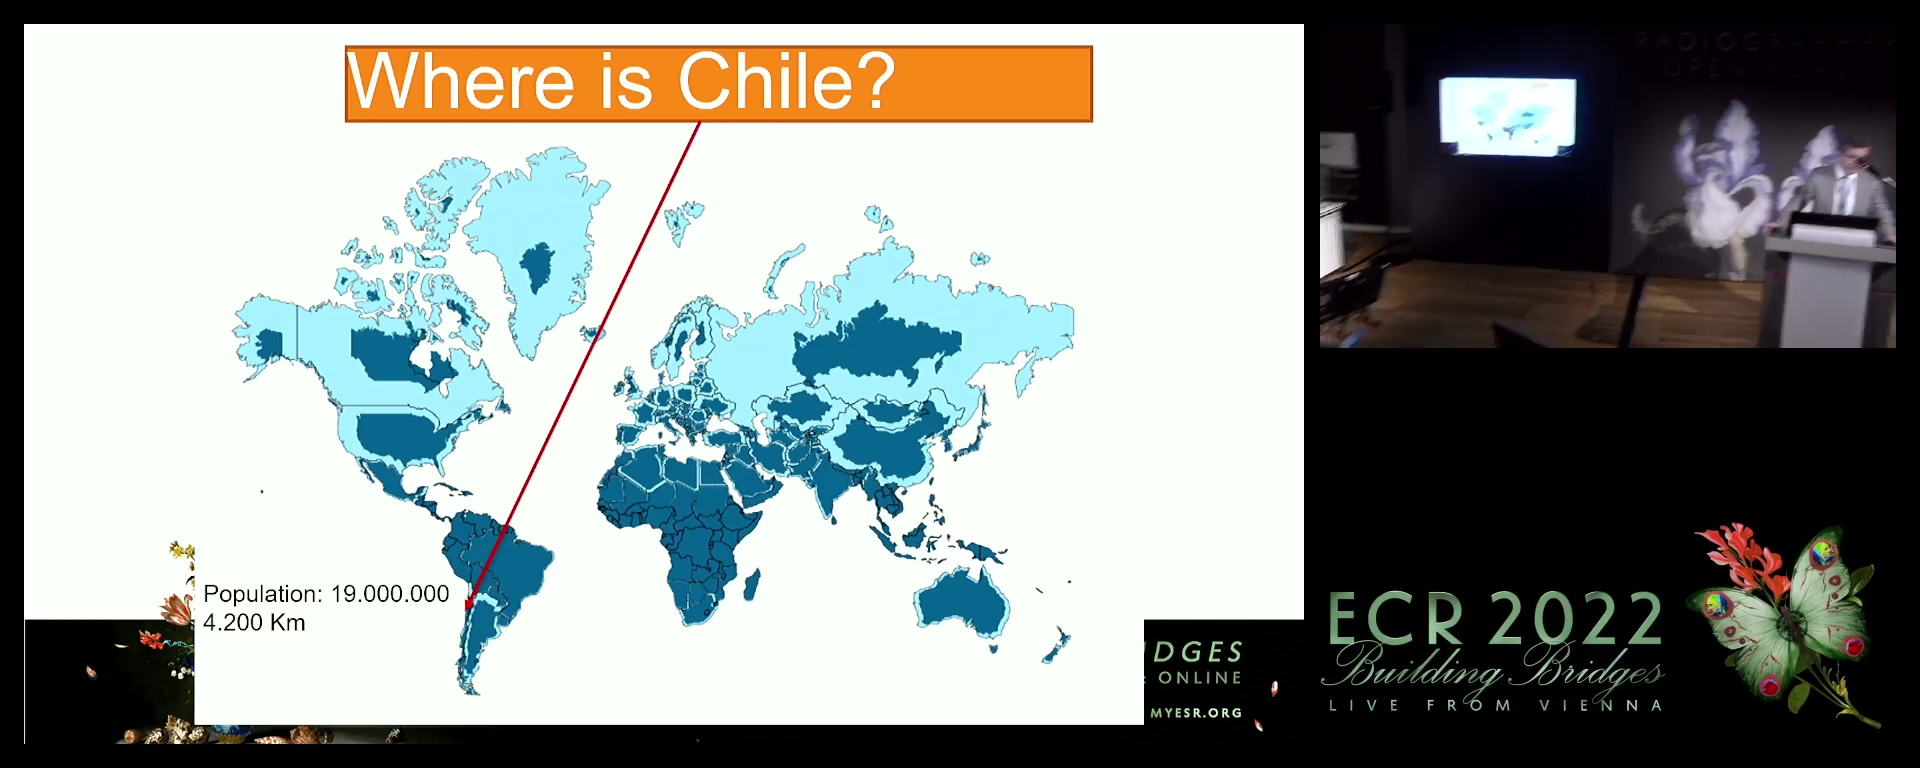 The impact of the COVID-19 pandemic on 10 main public imaging services in Chile - Marcelo Zenteno, Santiago / CL